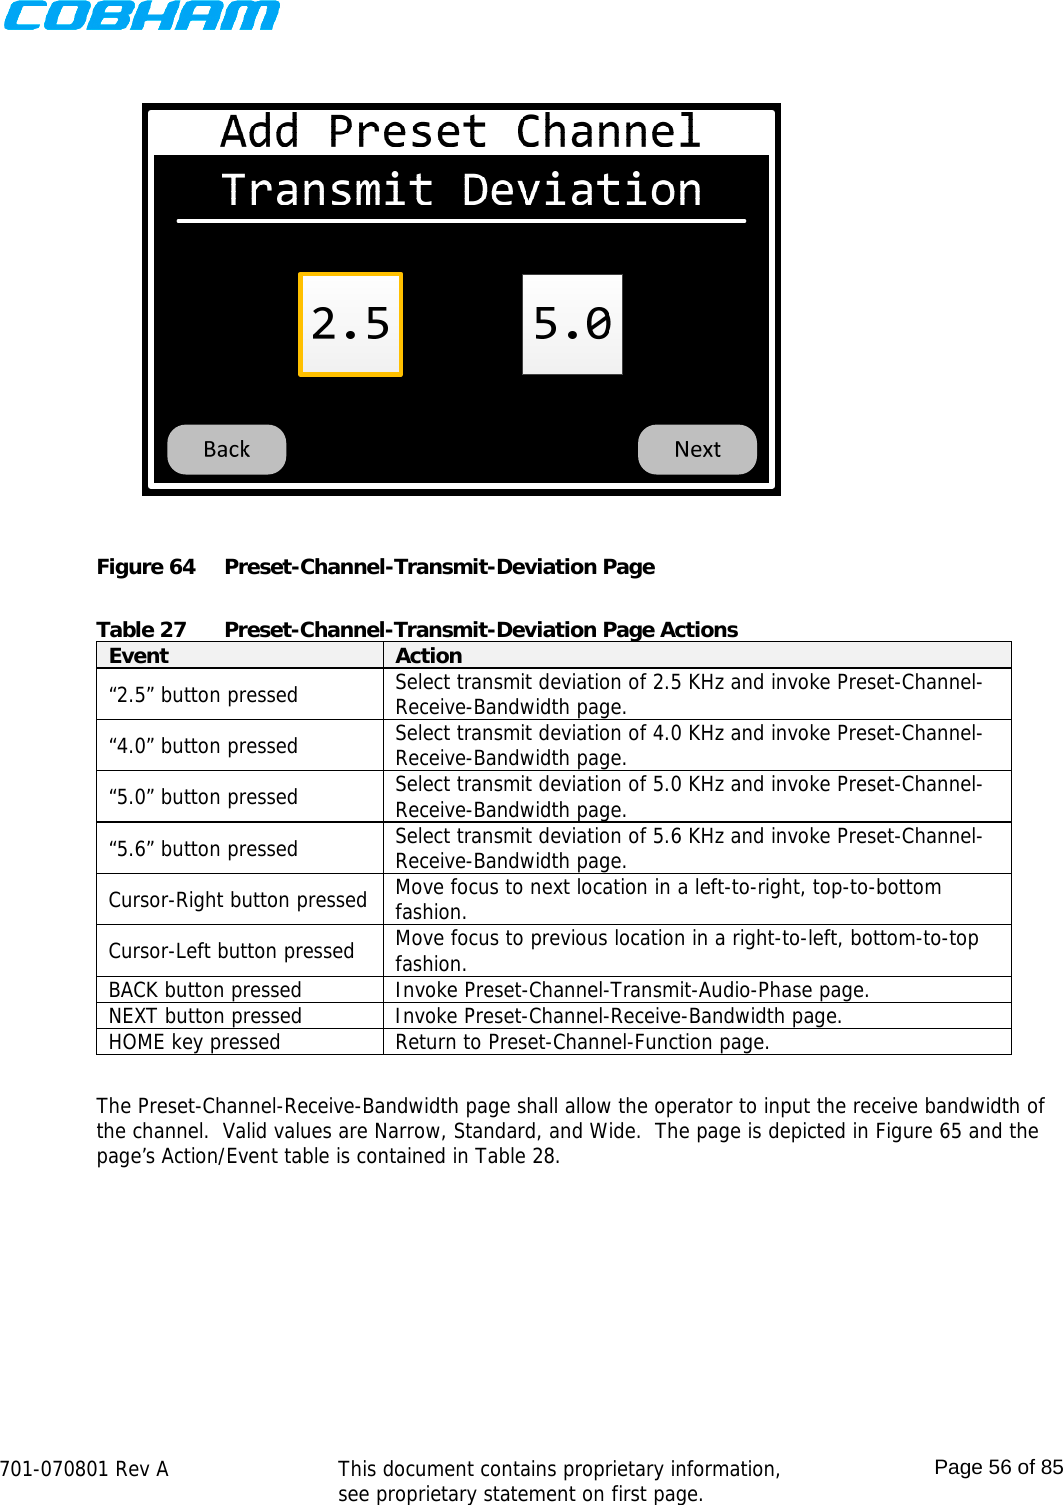    701-070801 Rev A   This document contains proprietary information, see proprietary statement on first page.  Page 56 of 85   Figure 64  Preset-Channel-Transmit-Deviation Page  Table 27  Preset-Channel-Transmit-Deviation Page Actions Event  Action “2.5” button pressed  Select transmit deviation of 2.5 KHz and invoke Preset-Channel-Receive-Bandwidth page. “4.0” button pressed  Select transmit deviation of 4.0 KHz and invoke Preset-Channel-Receive-Bandwidth page. “5.0” button pressed  Select transmit deviation of 5.0 KHz and invoke Preset-Channel-Receive-Bandwidth page. “5.6” button pressed  Select transmit deviation of 5.6 KHz and invoke Preset-Channel-Receive-Bandwidth page. Cursor-Right button pressed  Move focus to next location in a left-to-right, top-to-bottom fashion. Cursor-Left button pressed  Move focus to previous location in a right-to-left, bottom-to-top fashion. BACK button pressed  Invoke Preset-Channel-Transmit-Audio-Phase page. NEXT button pressed  Invoke Preset-Channel-Receive-Bandwidth page. HOME key pressed  Return to Preset-Channel-Function page.  The Preset-Channel-Receive-Bandwidth page shall allow the operator to input the receive bandwidth of the channel.  Valid values are Narrow, Standard, and Wide.  The page is depicted in Figure 65 and the page’s Action/Event table is contained in Table 28. 